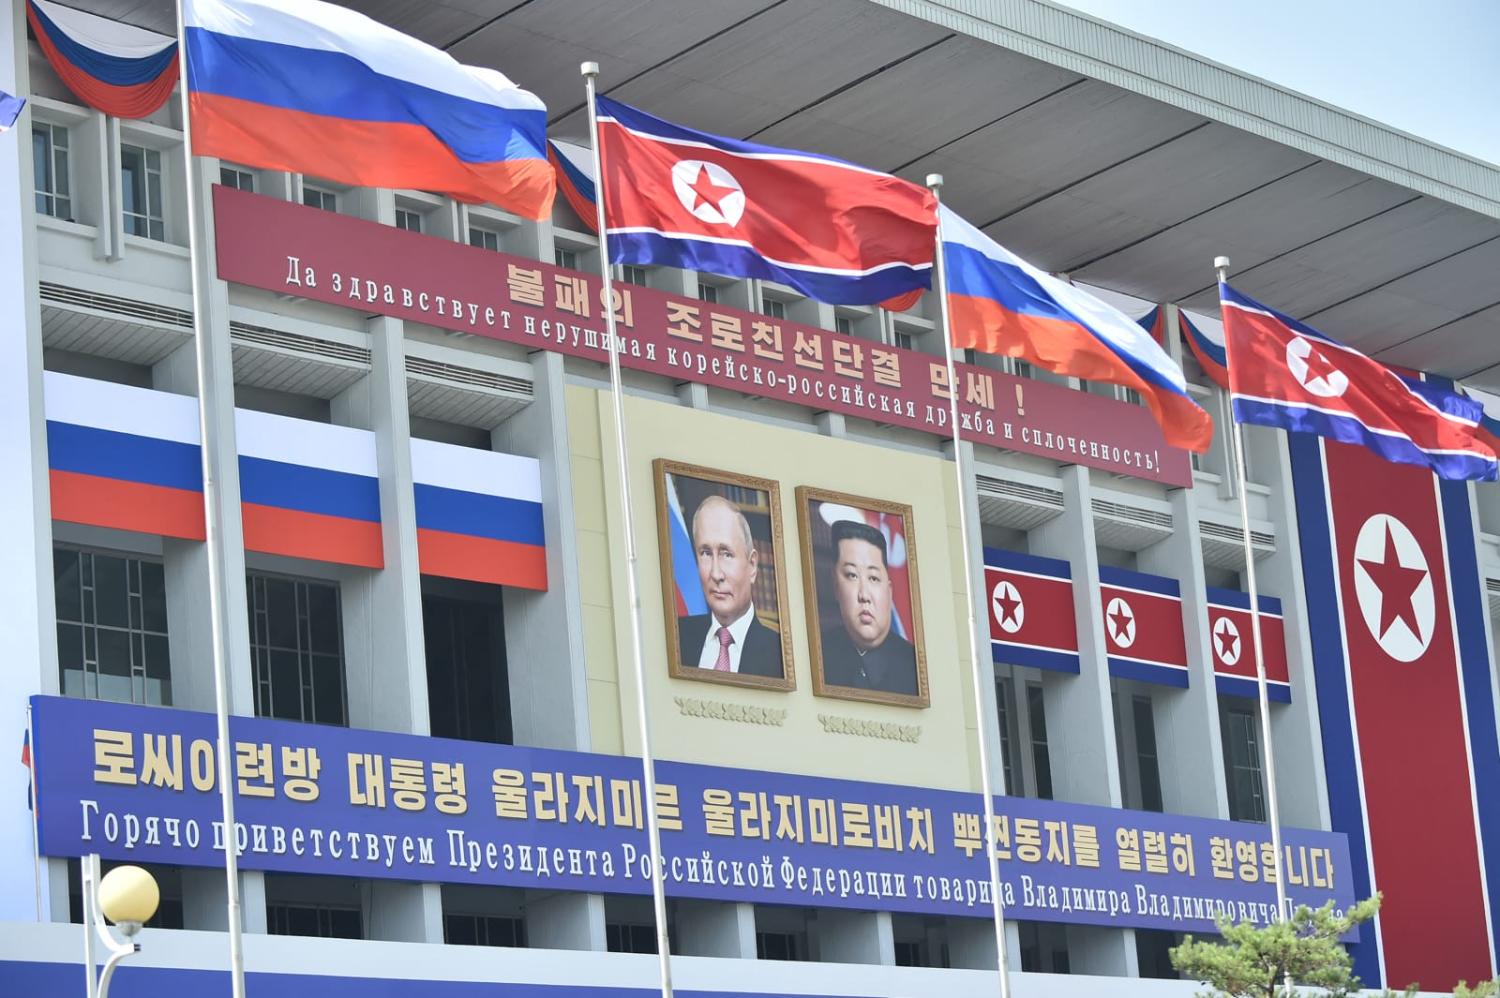 Banners that translate as "Long live the undefeated friendship and unity of DPRK-Russia!" and other messages welcoming Vladimir Putin to Pyongyang last month (Kim Won-jin/AFP via Getty Images)